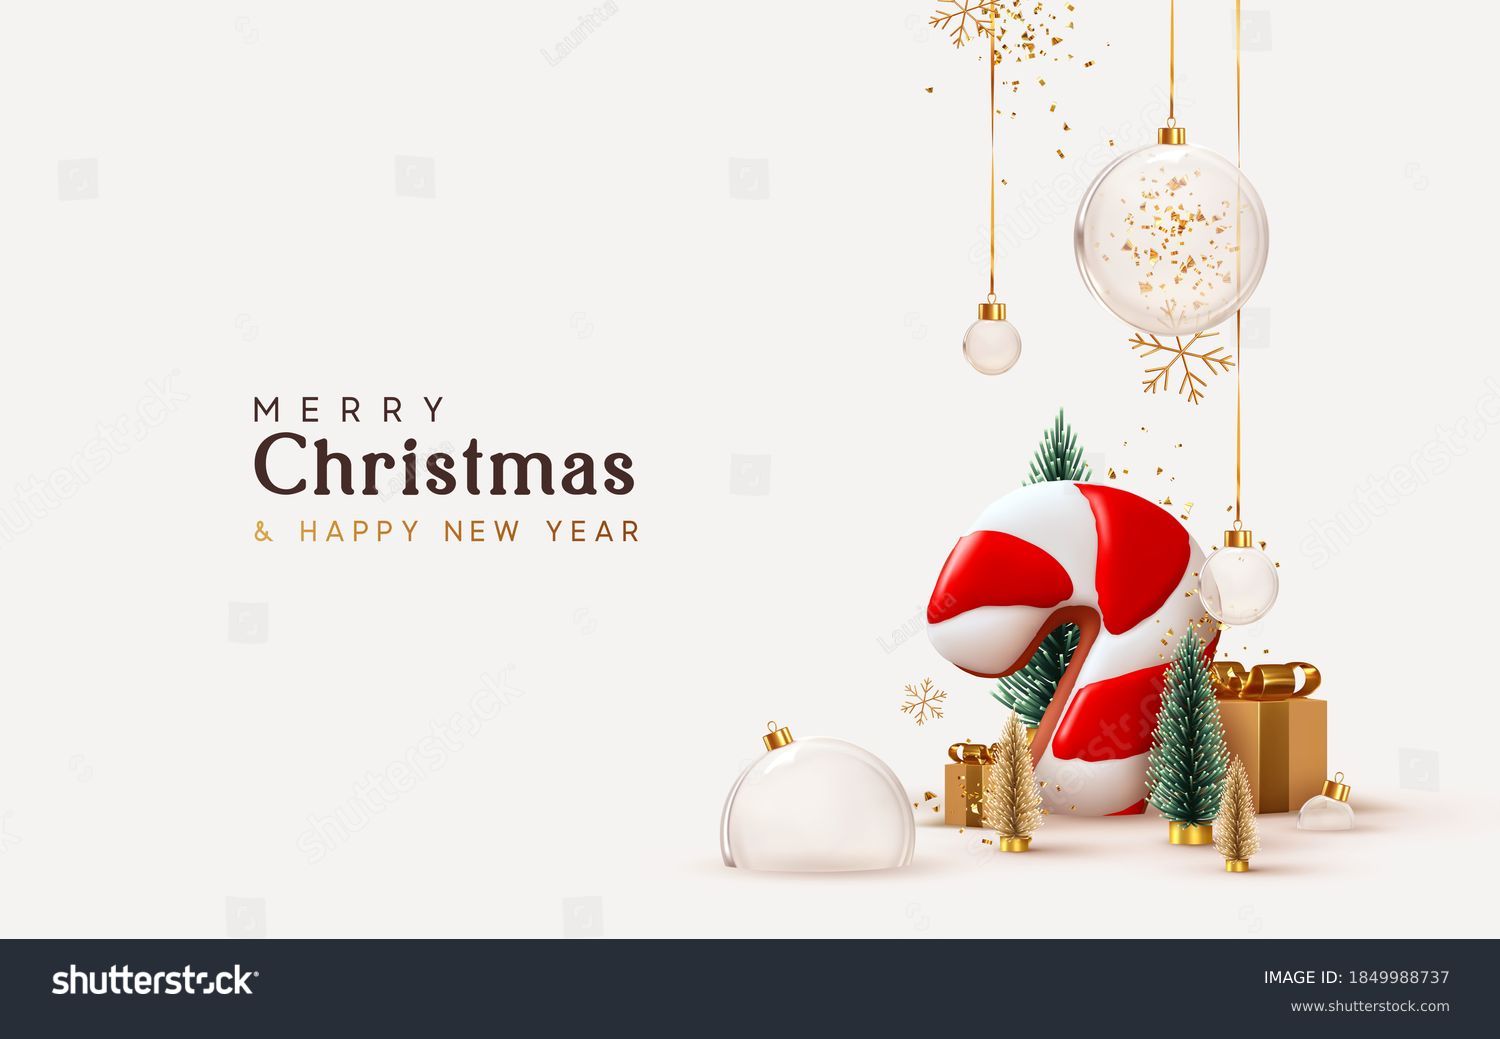 Christmas and New Year background. Xmas pine fir lush tree. Candy cane from cookies, golden gifts box. Glass Balls hanging on ribbon. Bright Winter holiday composition. Greeting card, banner, poster #1849988737